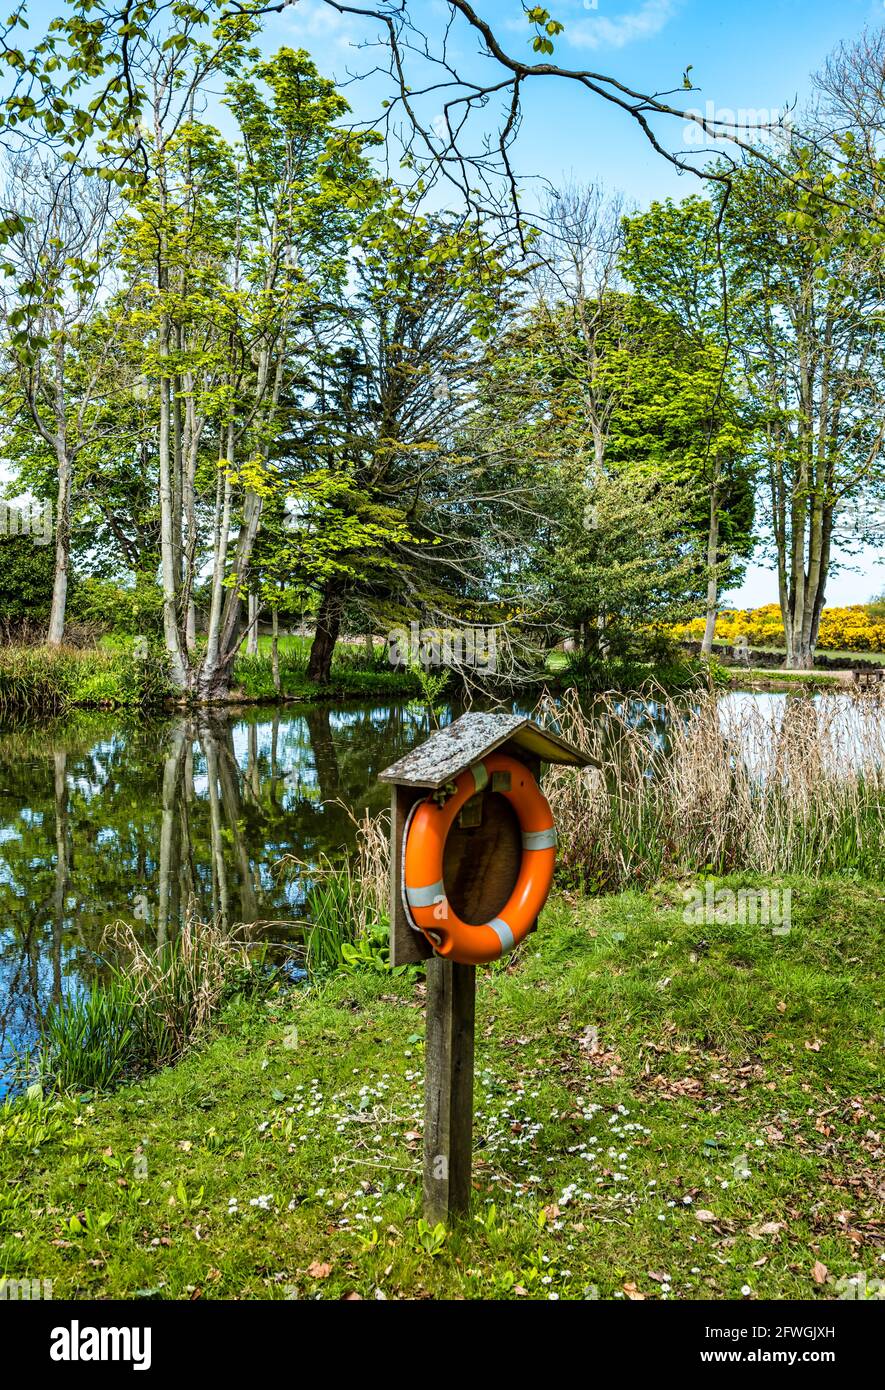 Life belt or ring beside small pond or lake in Archerfield estate, East Lothian, Scotland, UK Stock Photo